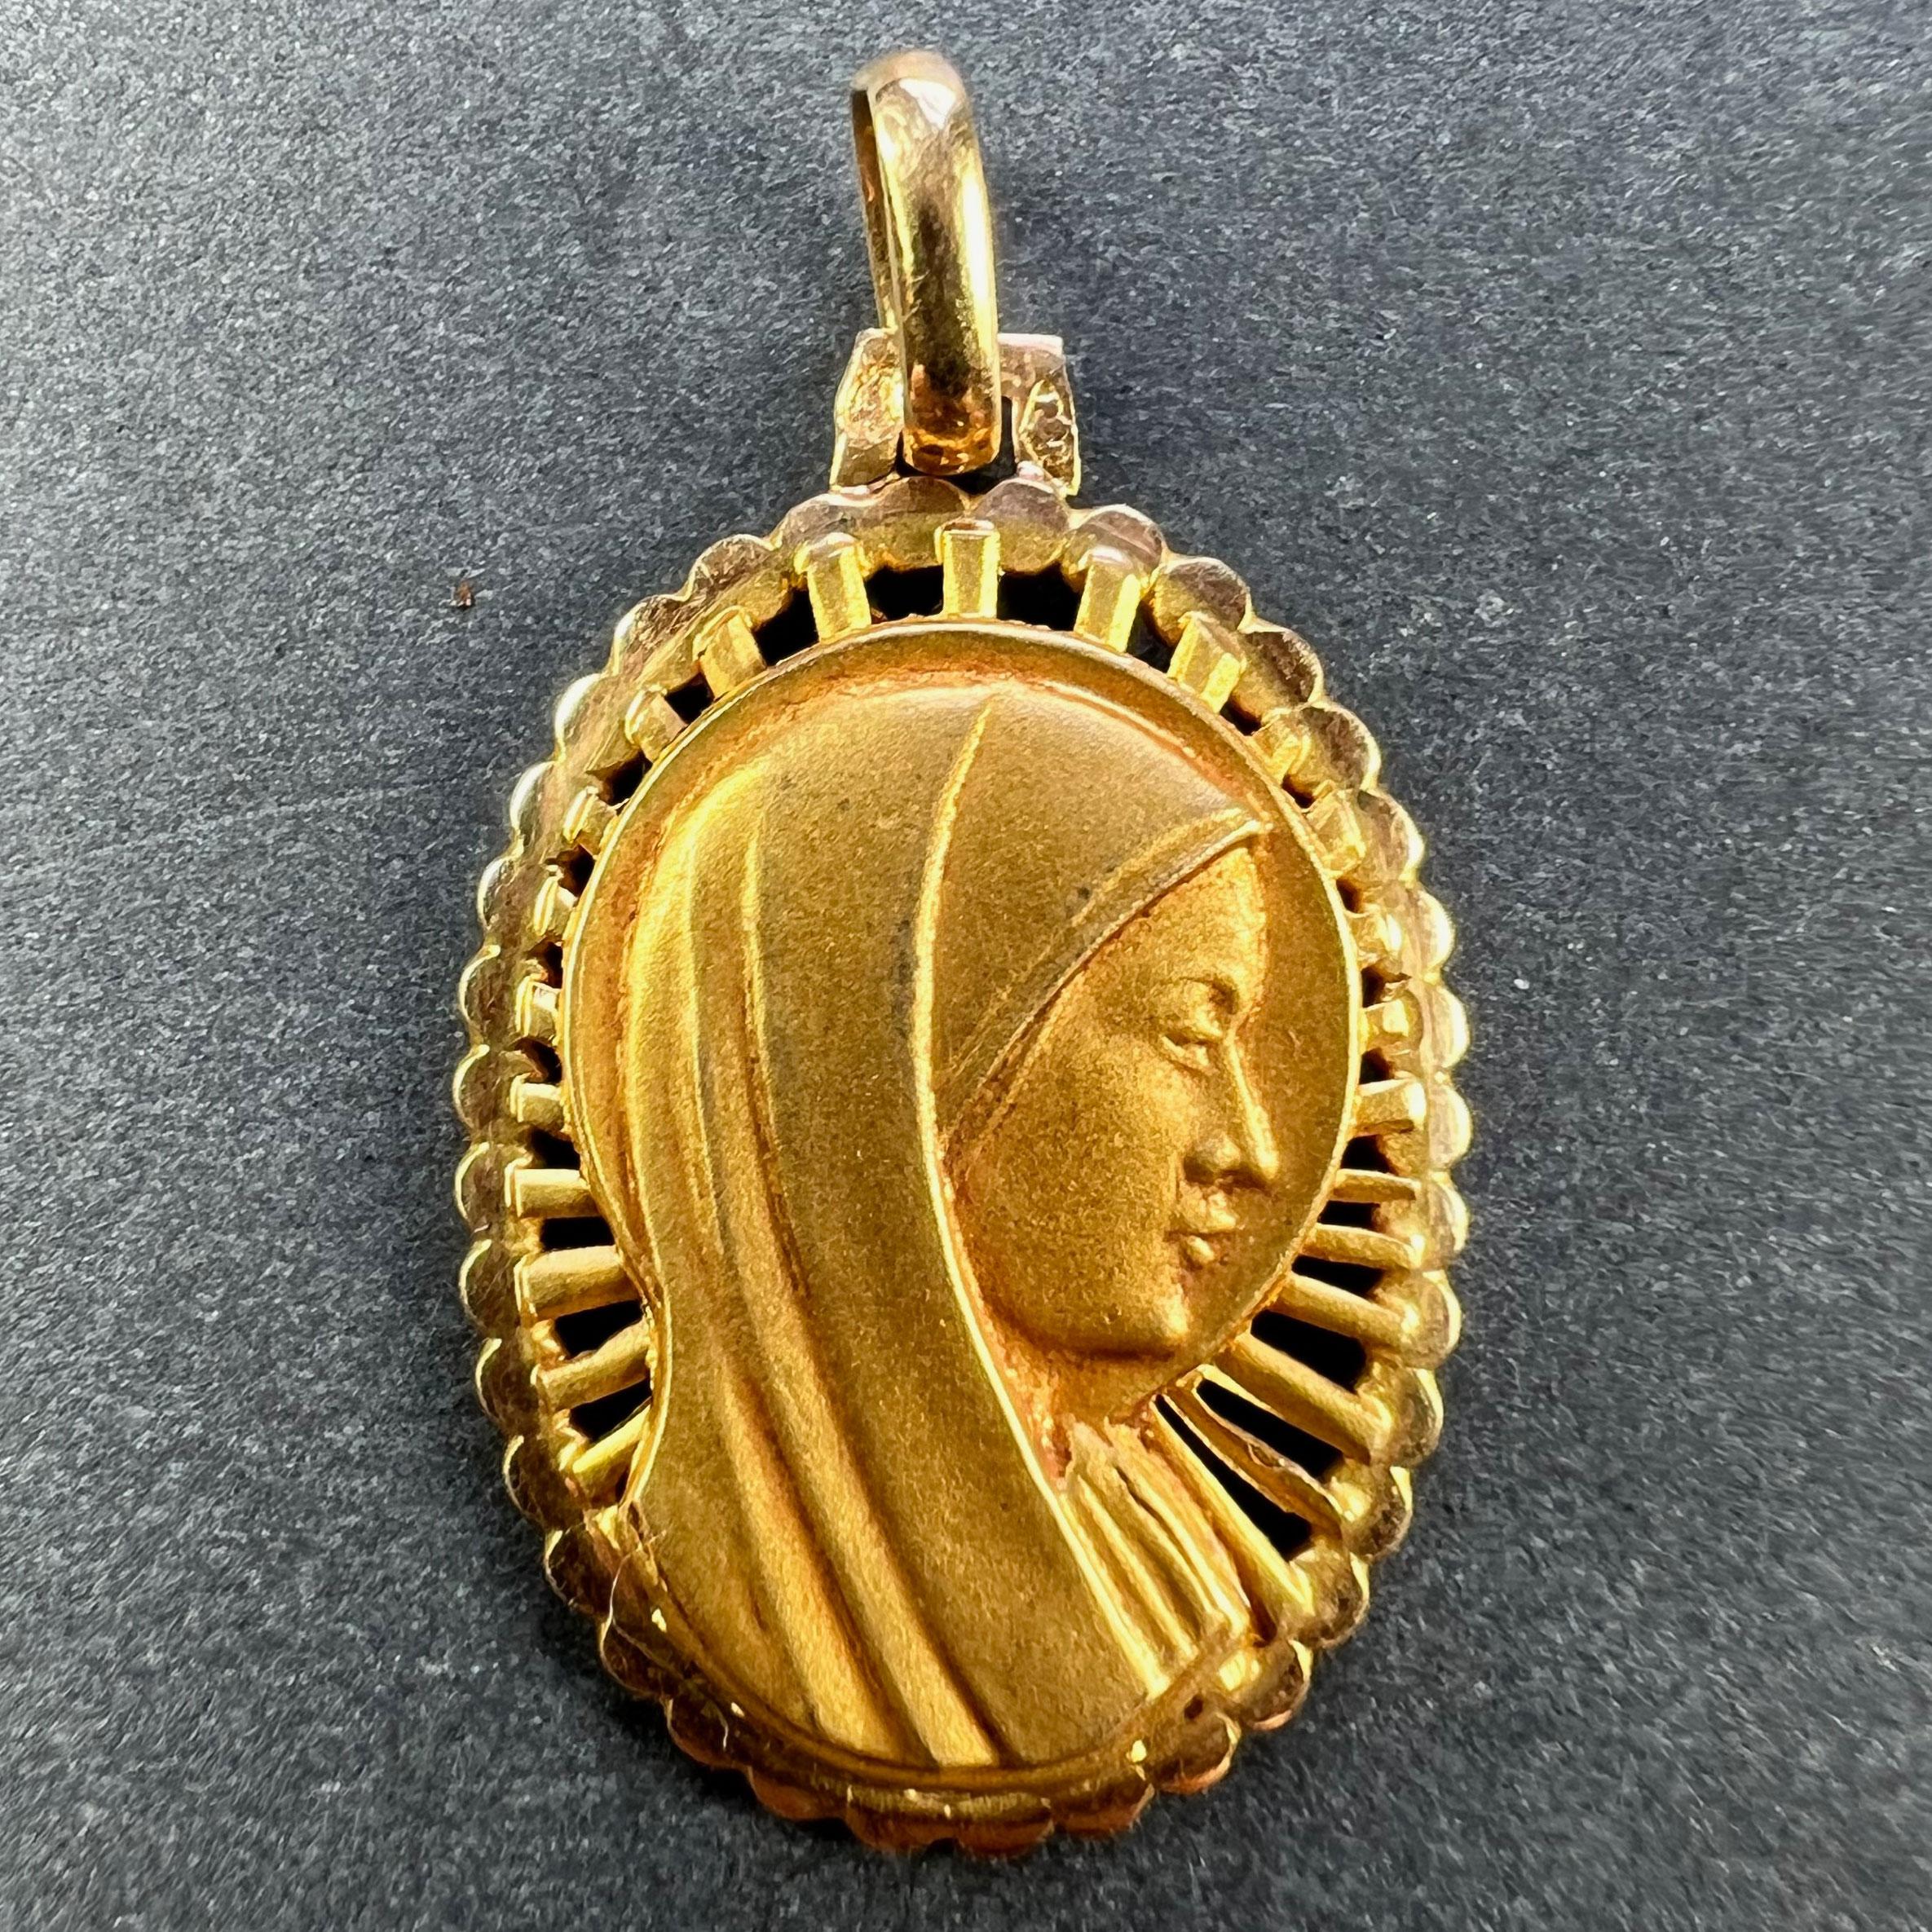 A French 18 karat (18K) yellow gold pendant designed as an oval medal depicting the Virgin Mary within a pierced sunburst frame. Stamped with the eagle’s head for French manufacture and 18 karat gold, with an unknown maker’s mark.

Dimensions: 2.4 x